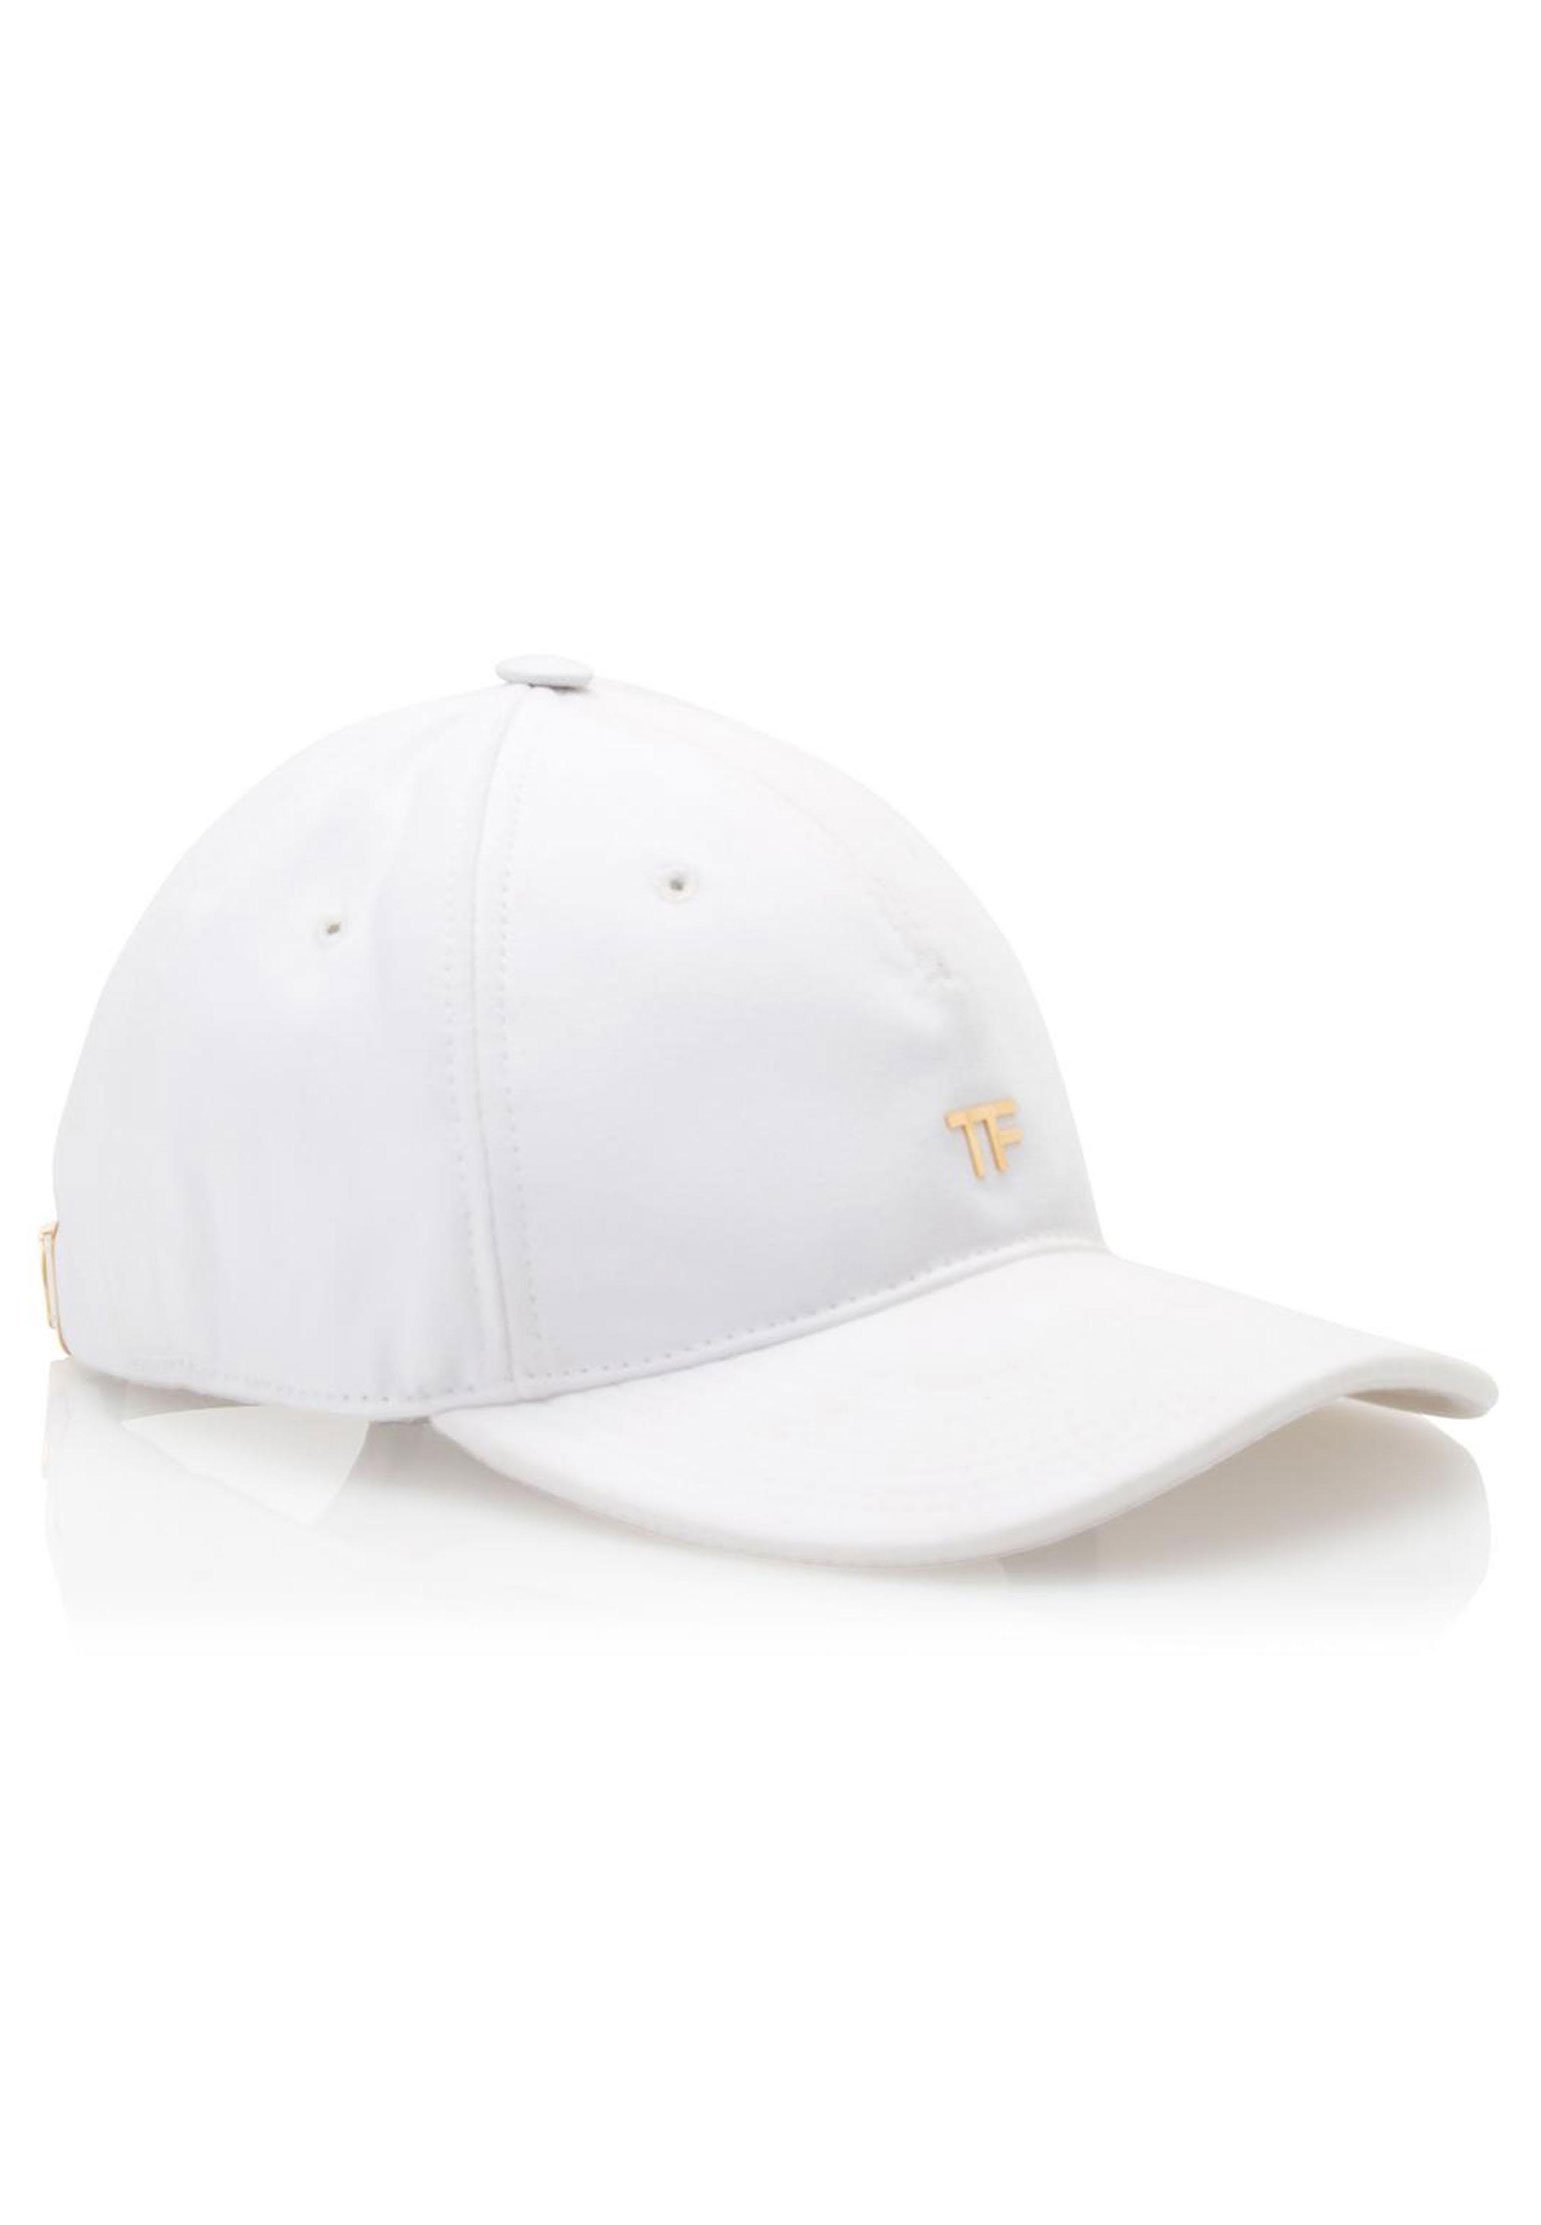 Baceball cap TOM FORD Color: white (Code: 1098) in online store Allure